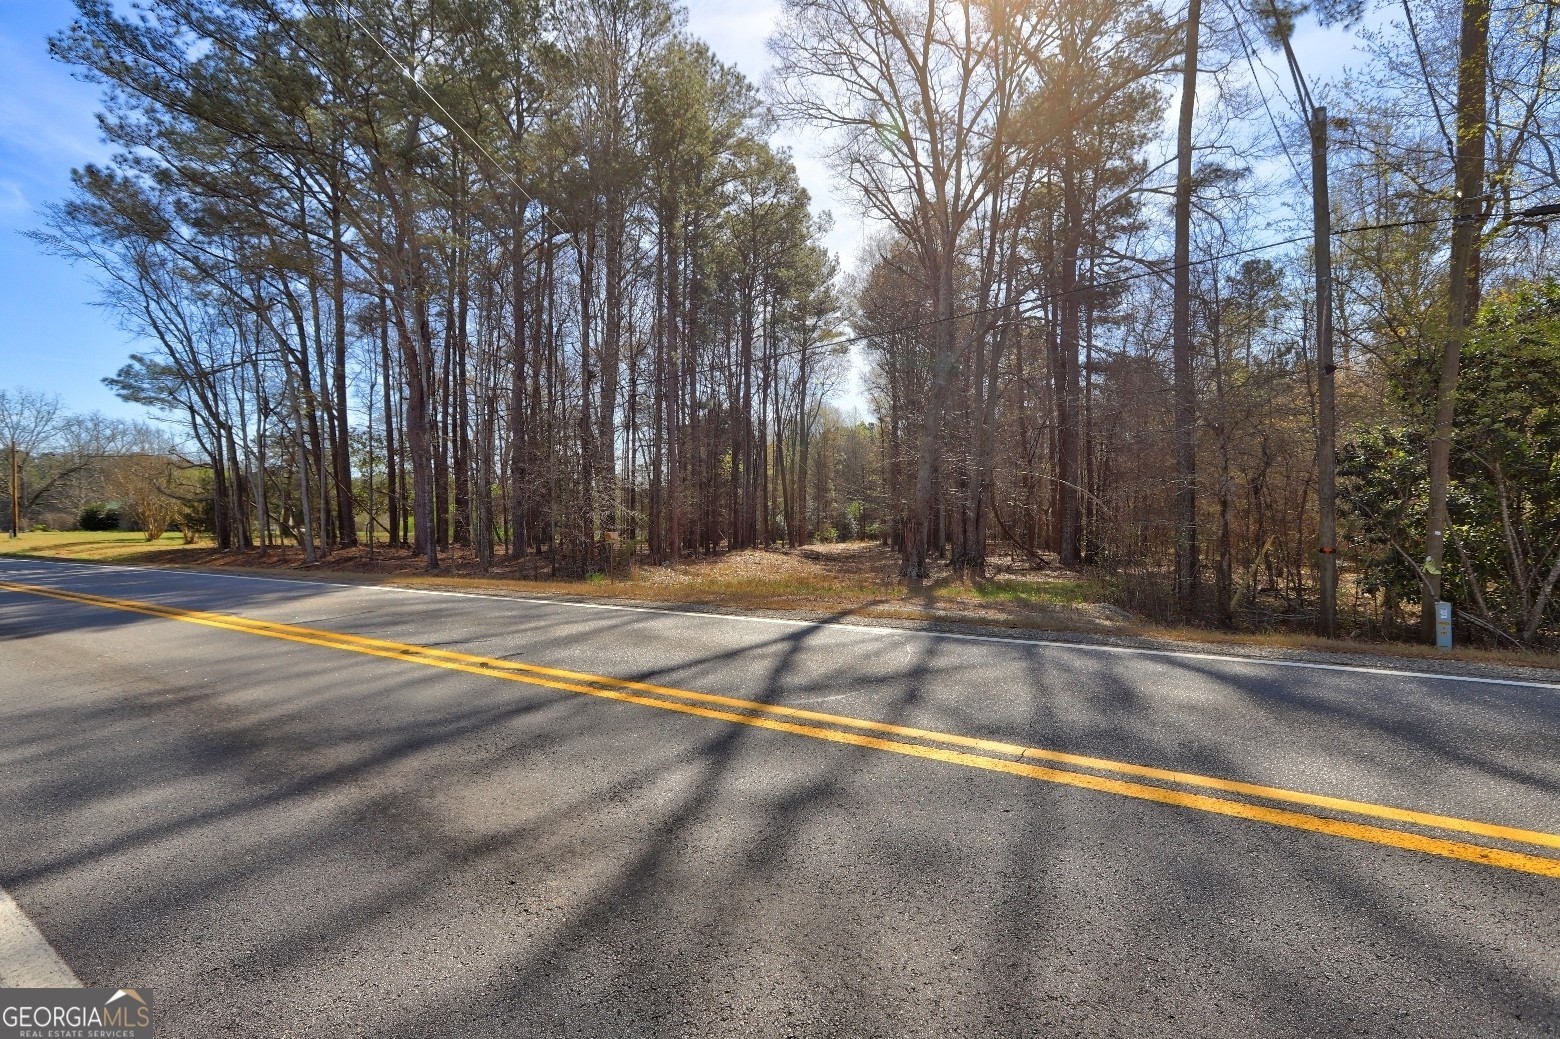 3. 205 Highway 186 Tract 1